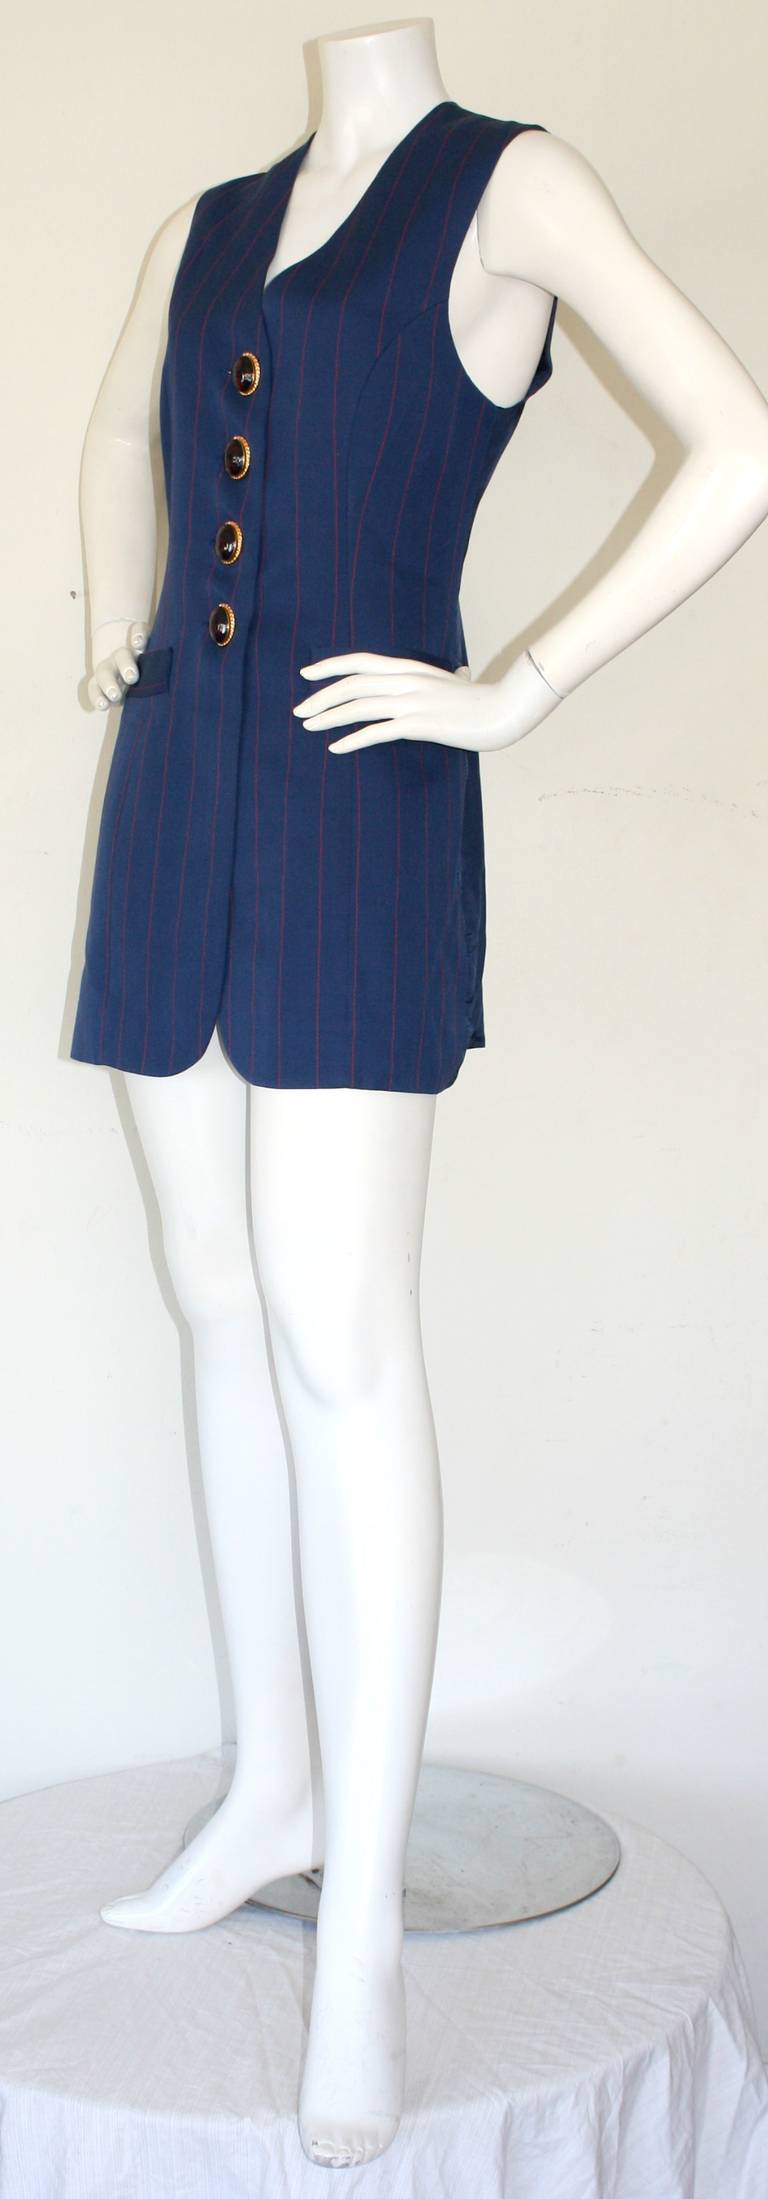 Purple Christian Dior Haute Couture Vintage Navy Red Pinstripe Waistcoat Dress